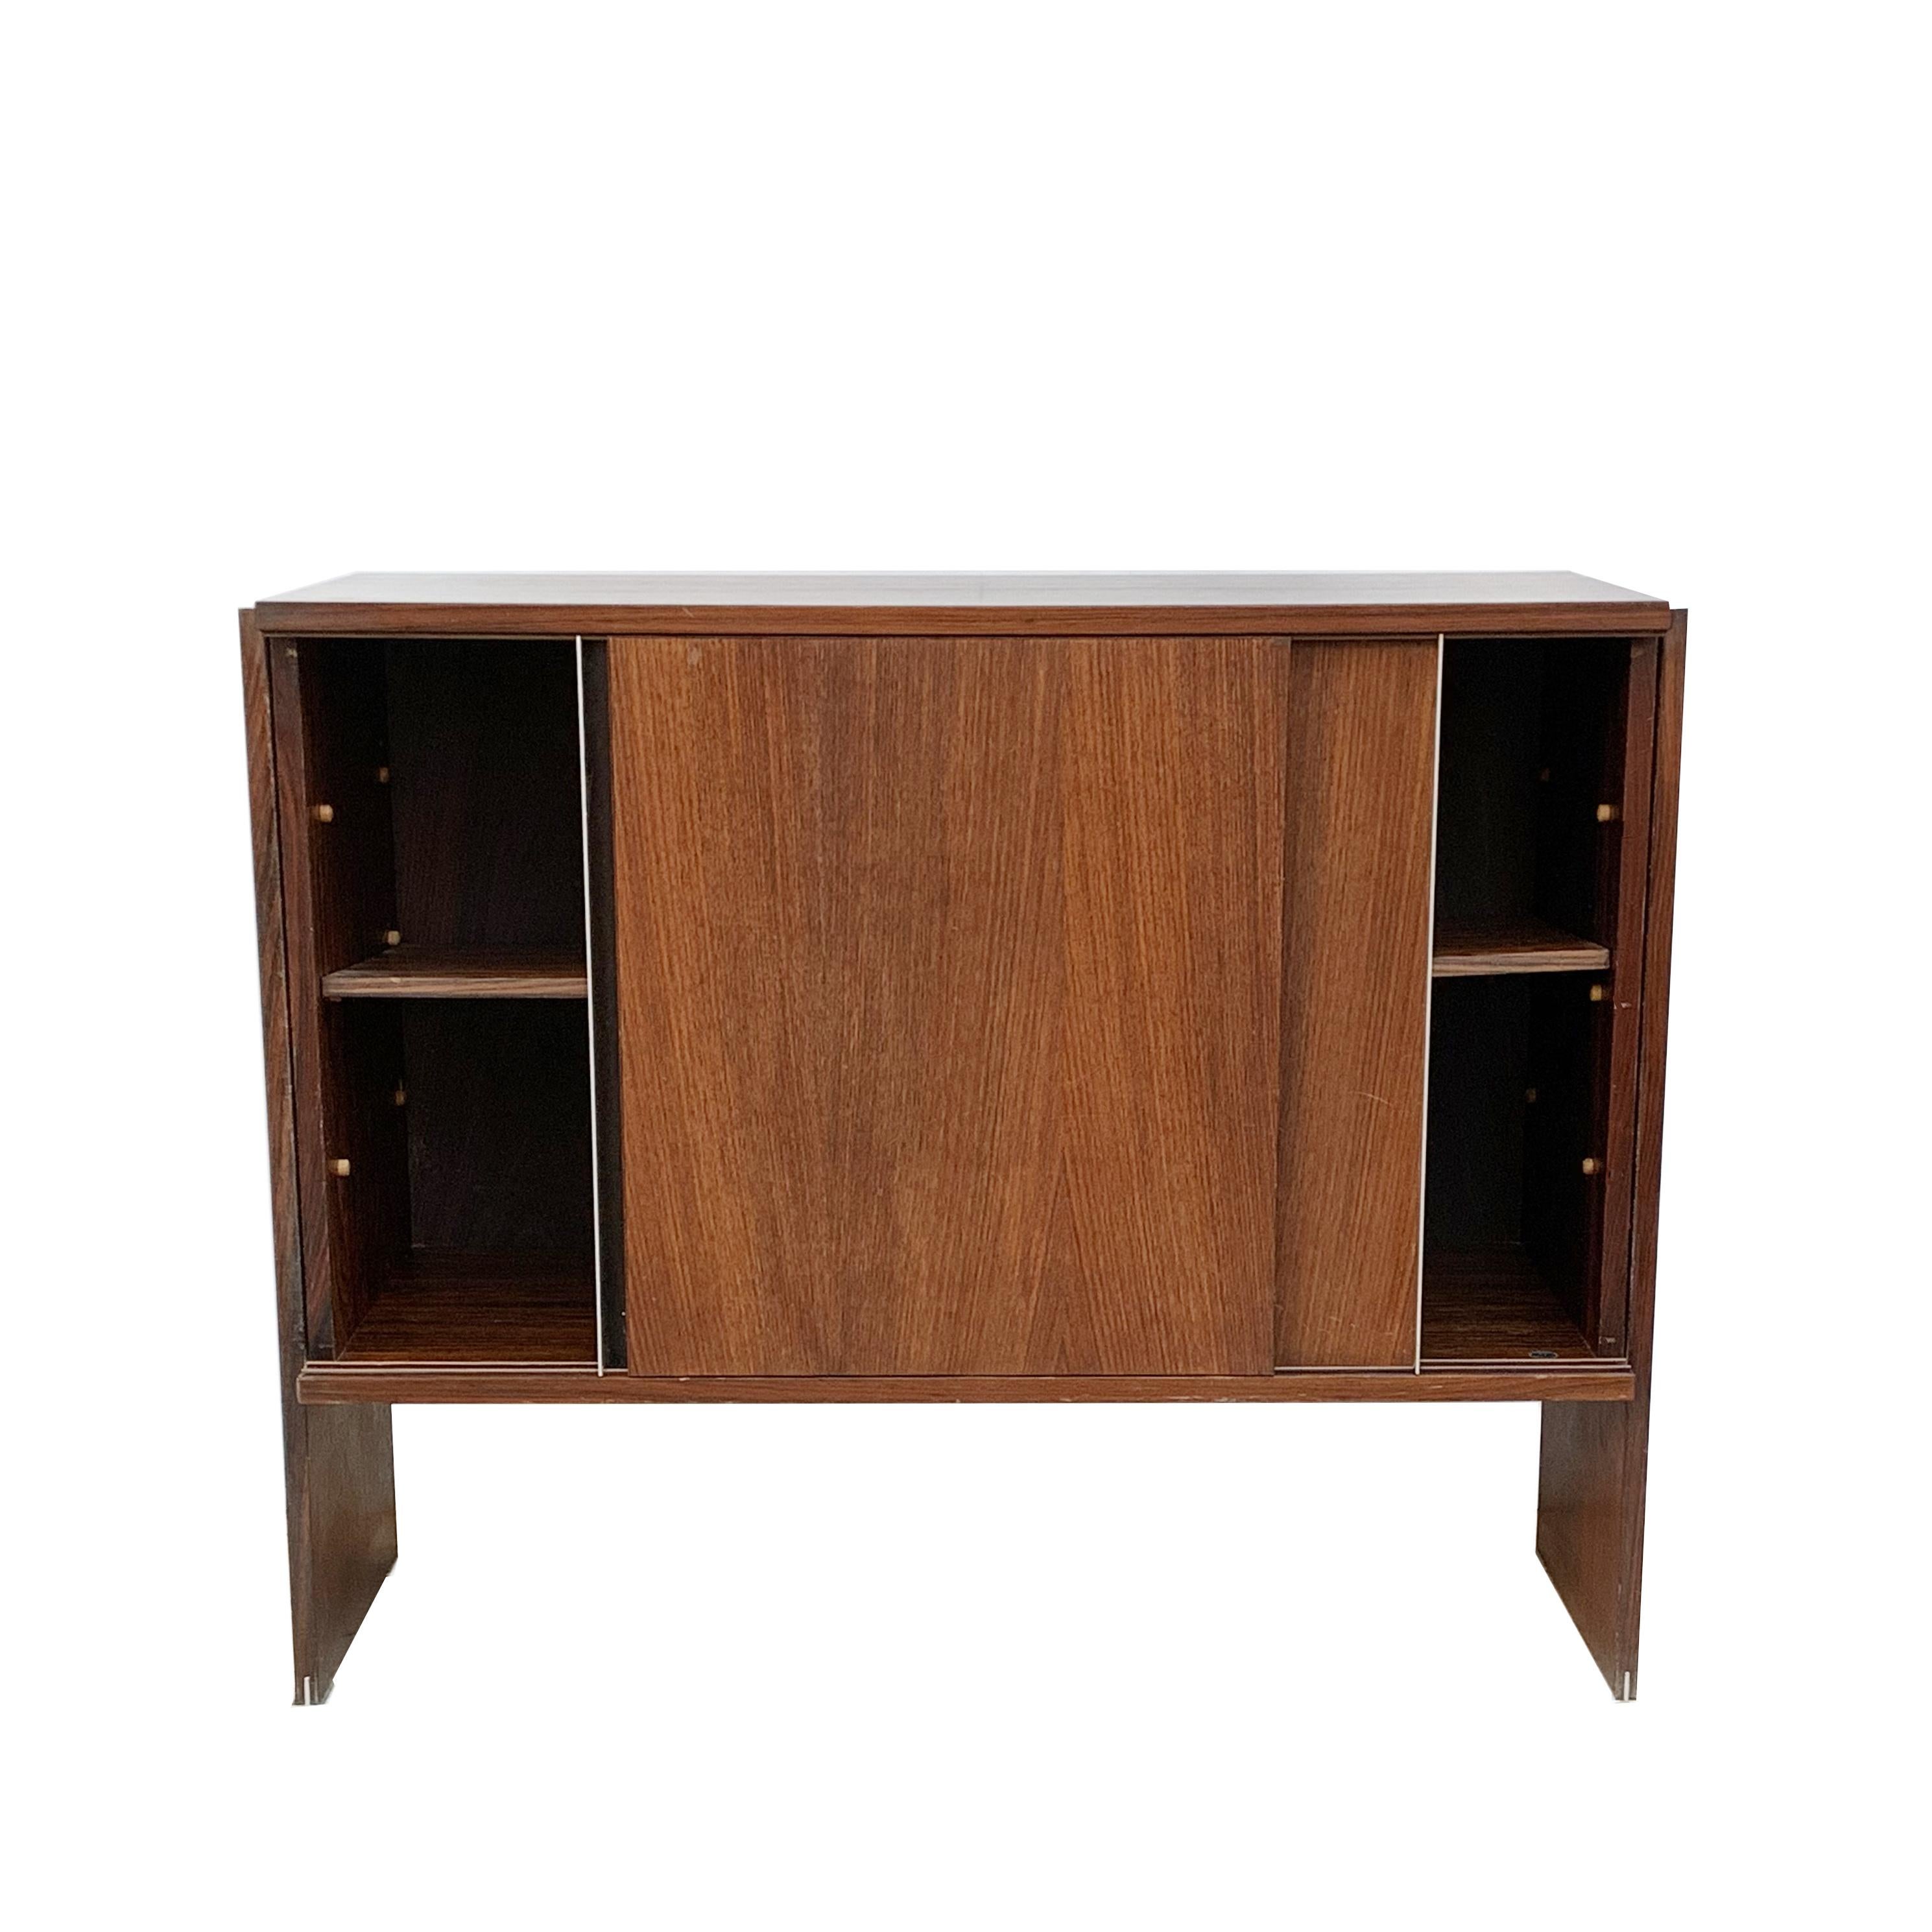 MIM Roma, Sideboard with Sliding Door, Italy, 1960s For Sale 9